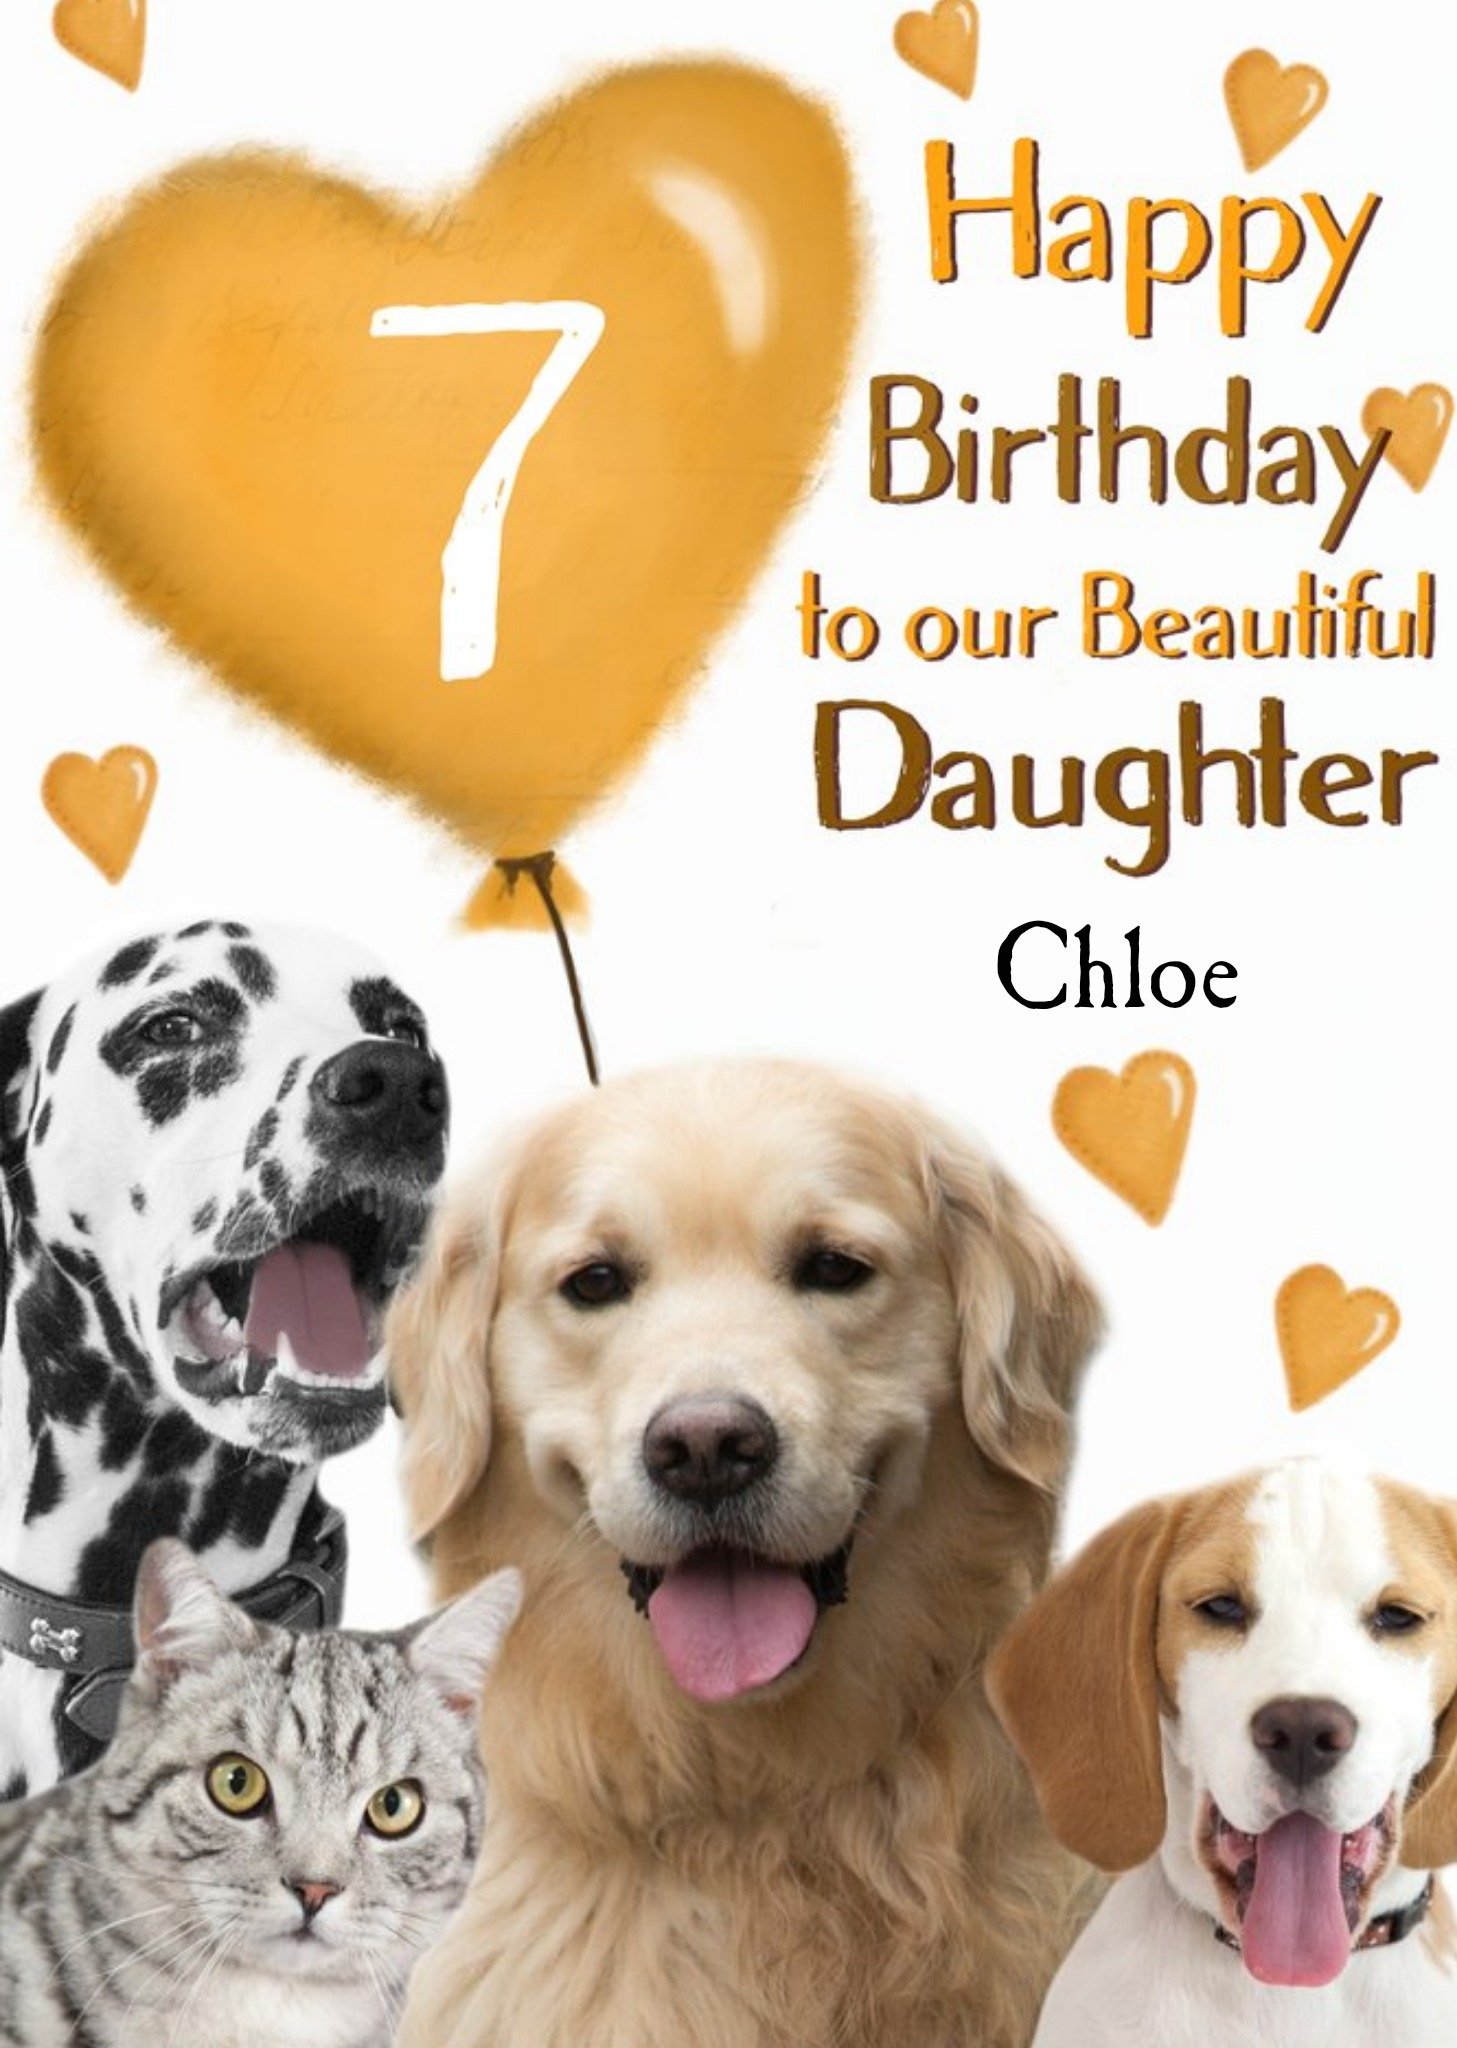 Moonpig Photo Of Dogs And Cats With Birthday Balloon Daughter 7th Birthday Card Ecard